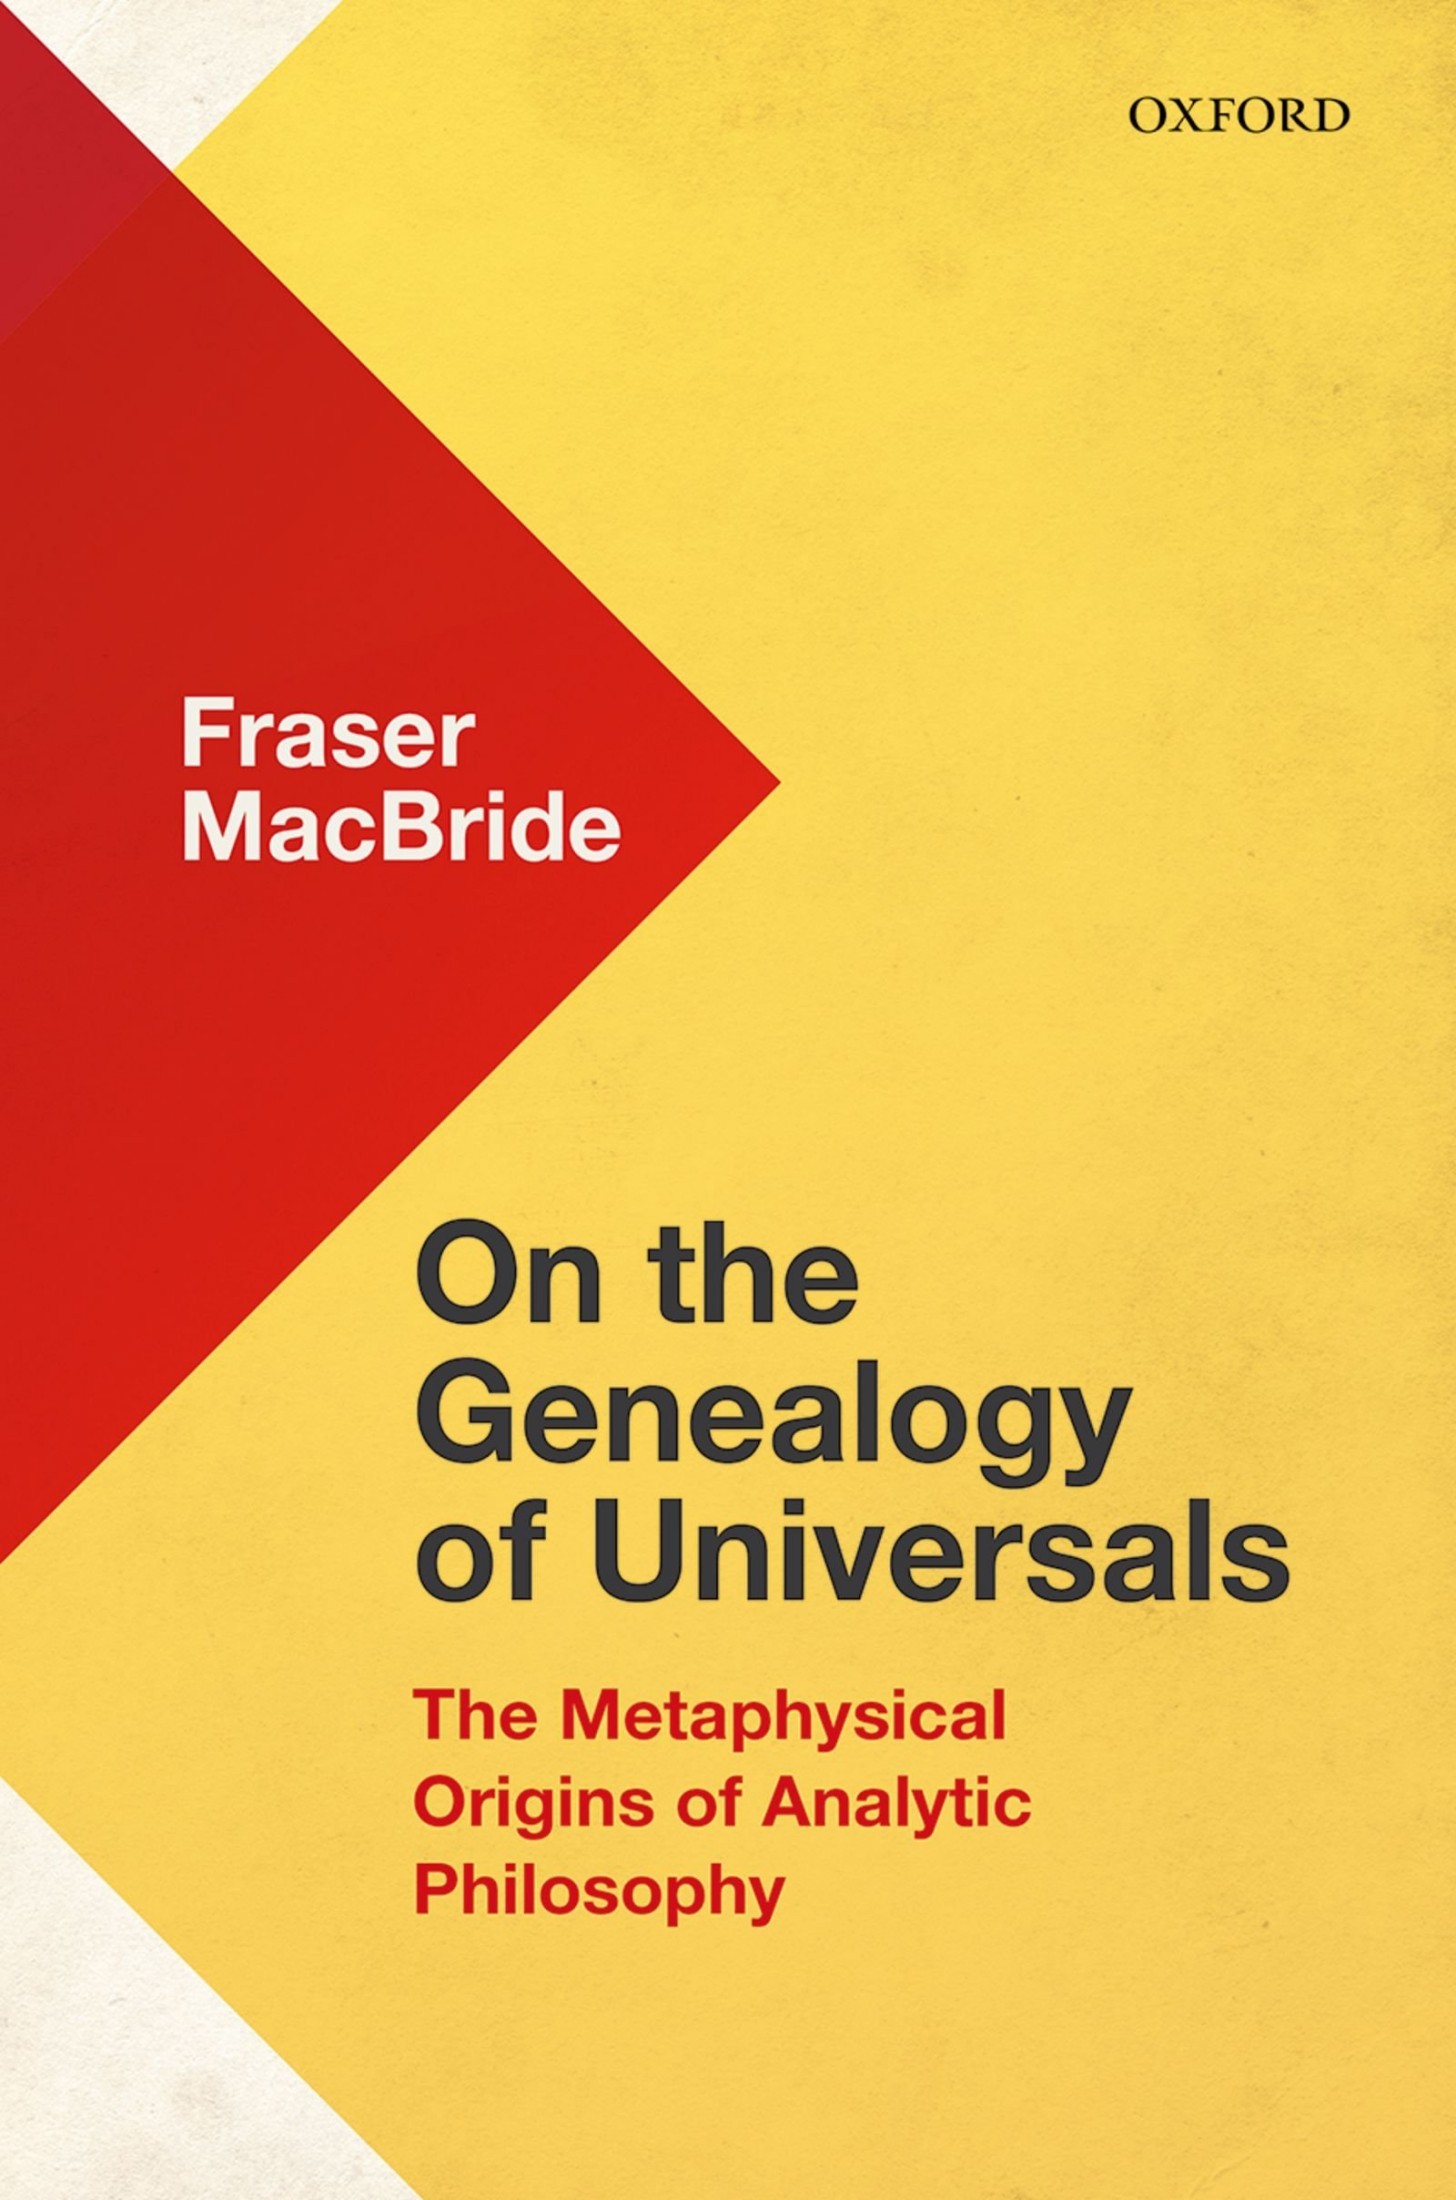 On the Genealogy of Universals: The Metaphysical Origins of Analytic Philosophy